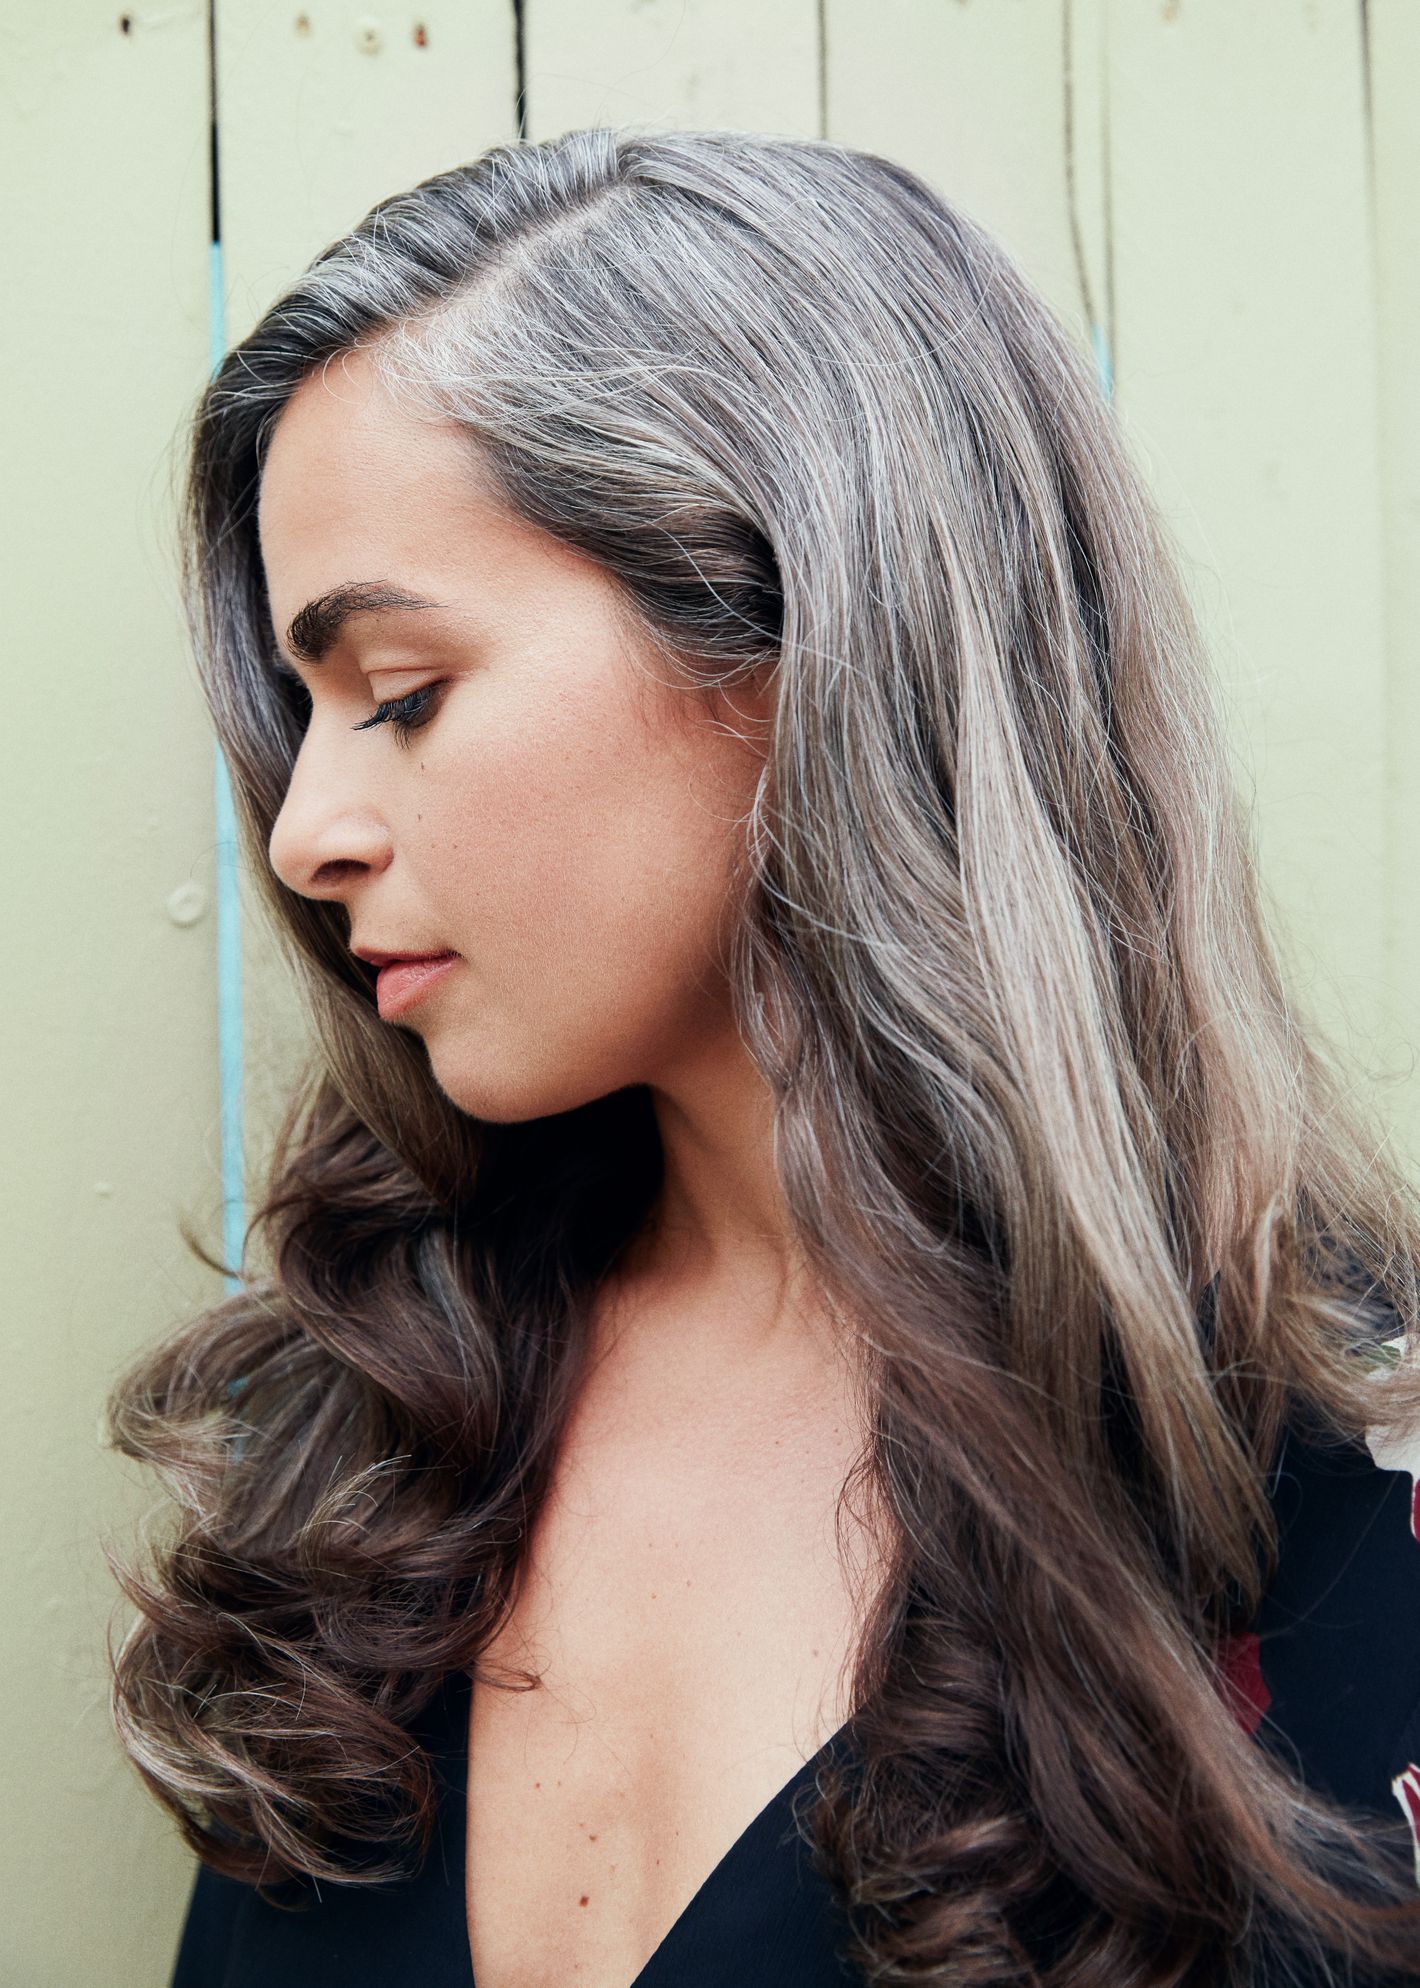 Everything You Need to Embrace Your Gray Hair